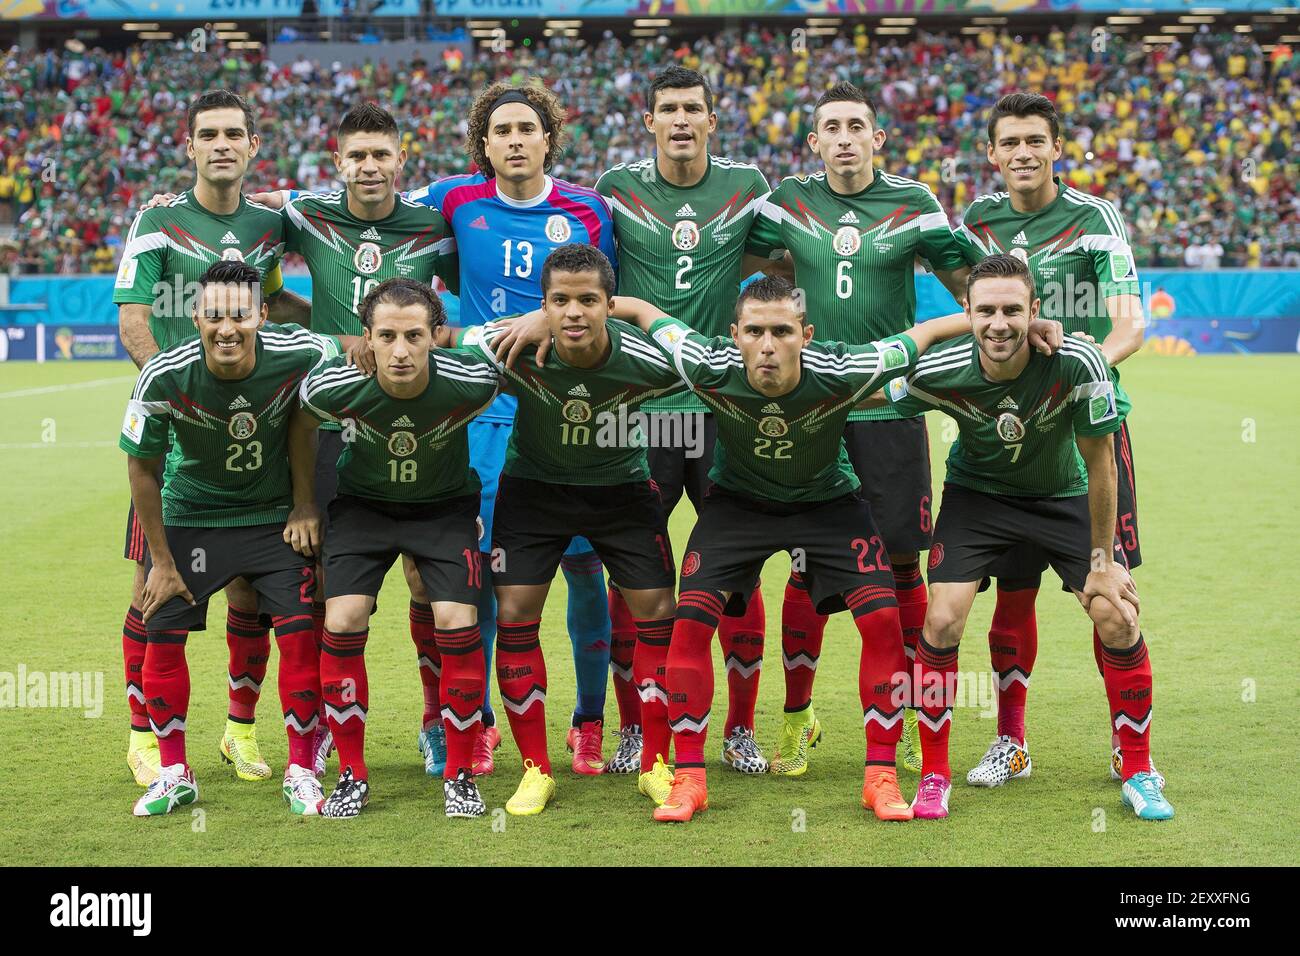 Mexicos team during the group A 2014 FIFA World Cup soccer match between Croatia and Mexico, in Arena Pernambuco Stadium in Recife, Brazil, on June 23, 2014